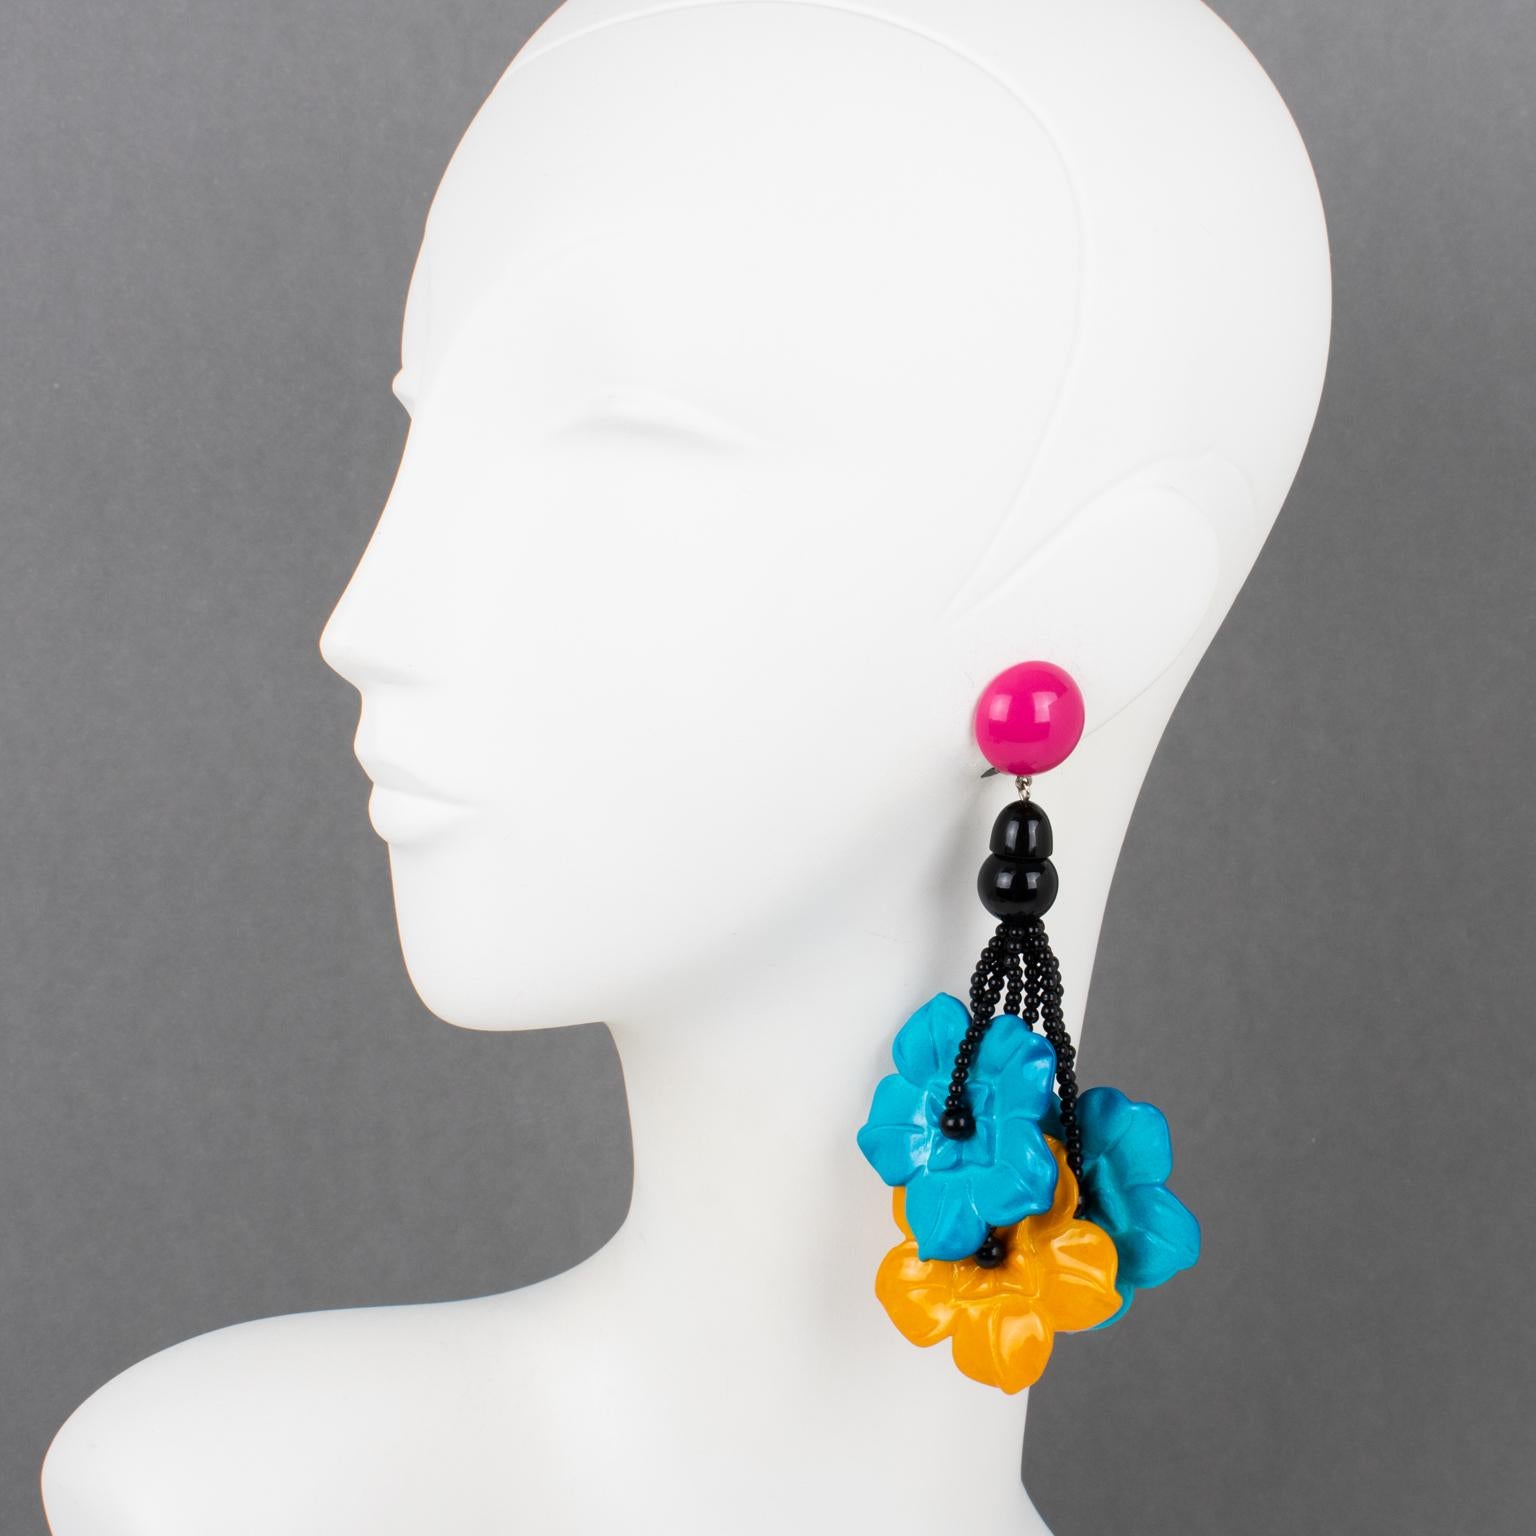 These stunning Angela Caputi, made-in-Italy resin clip-on earrings boast an oversized dangling-drop design with floral elements. The earrings feature three large, intricately carved flower petals in turquoise blue and yellow saffron colors. They are